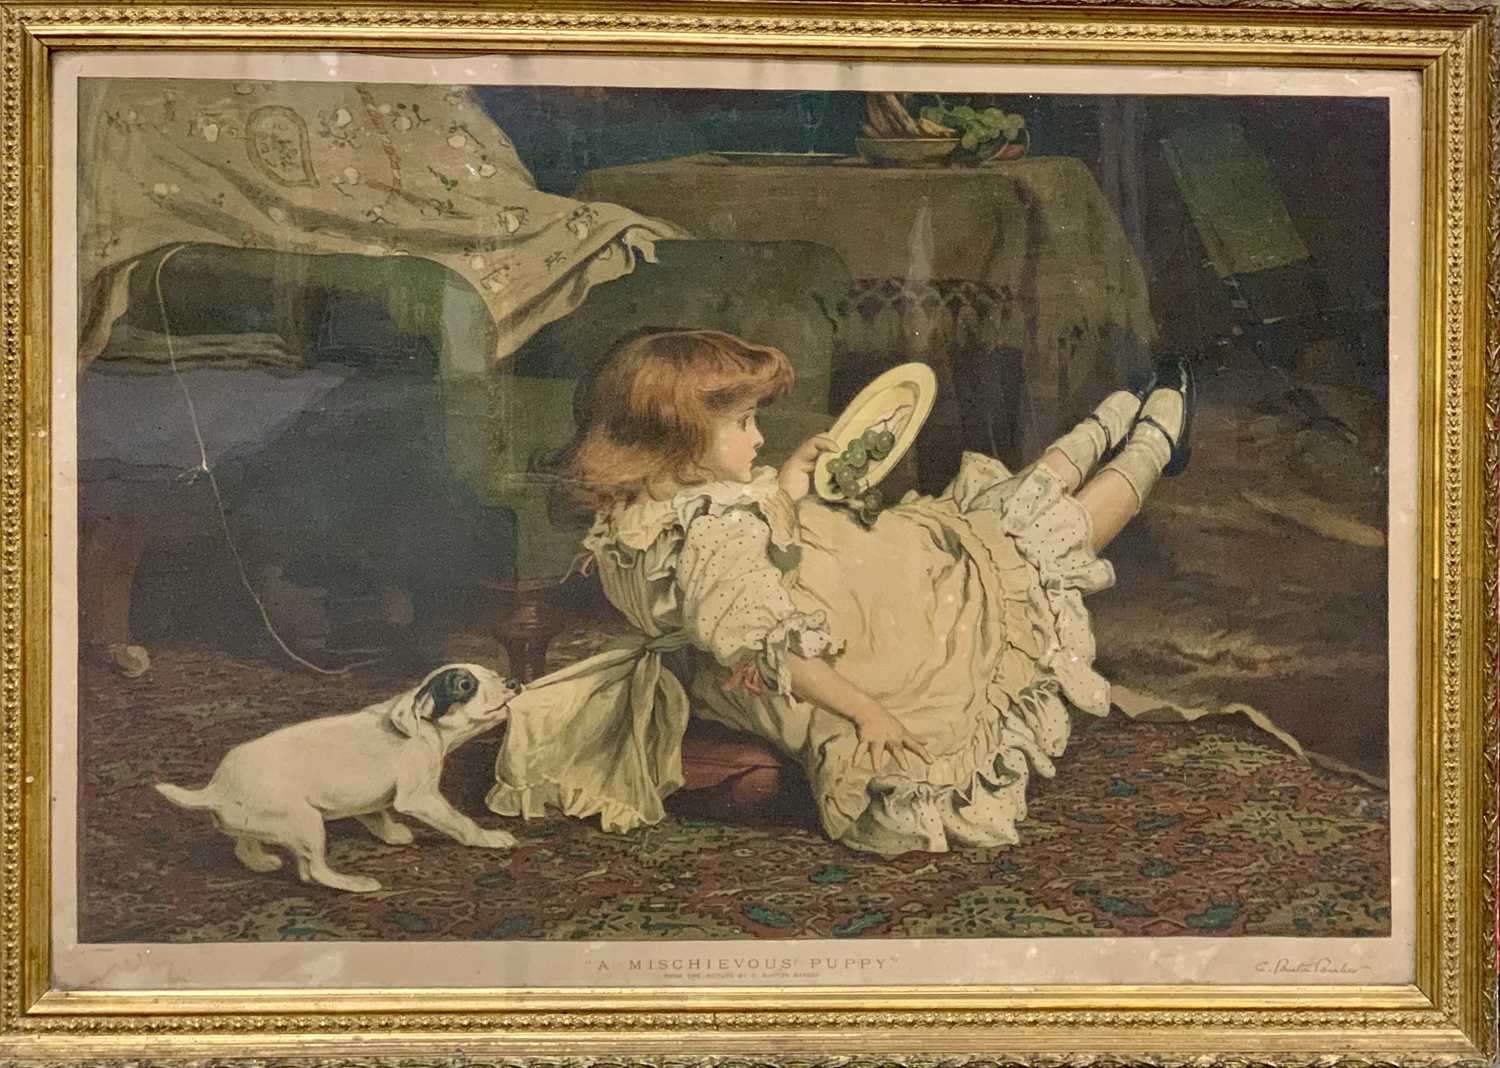 TWO LARGE FURNISHING PRINTS - C BURTON BARKER - titled 'A Mischievous Puppy' and GIOVANNI BATTISTA - Image 4 of 7